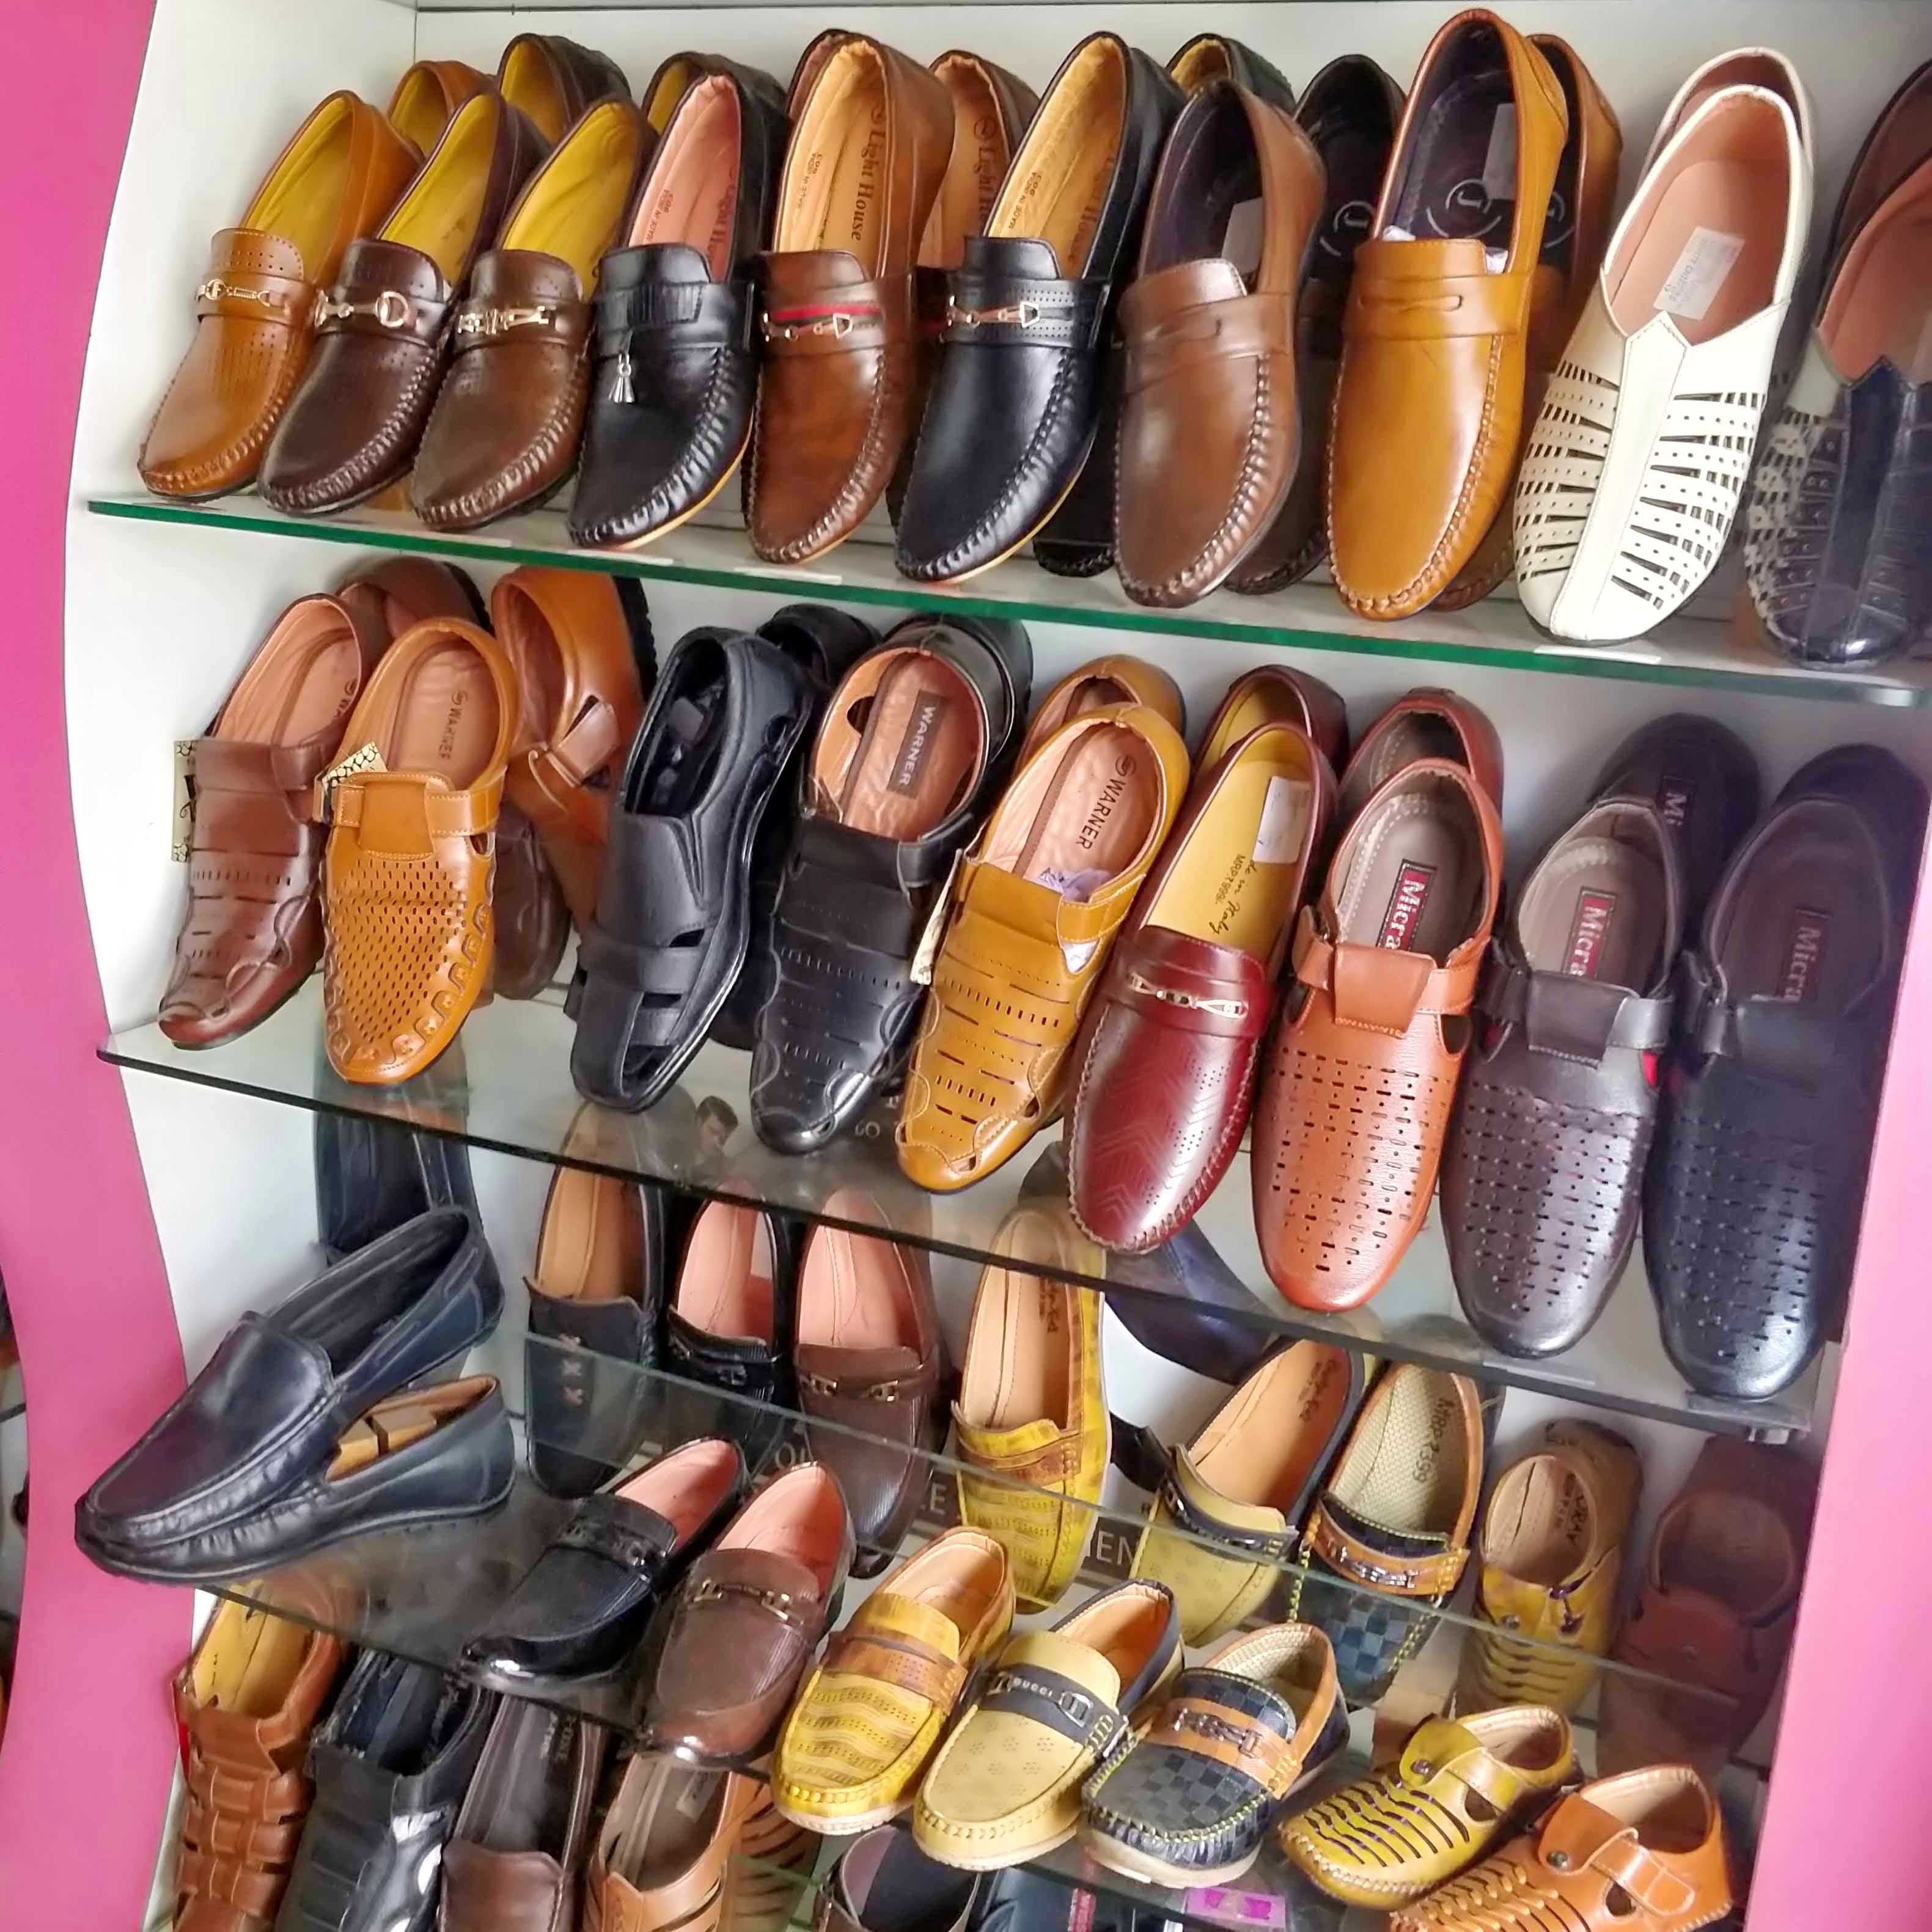 Footwear,Shoe,Dress shoe,Shoe store,Material property,Selling,Leather,Sandal,Nail,Collection